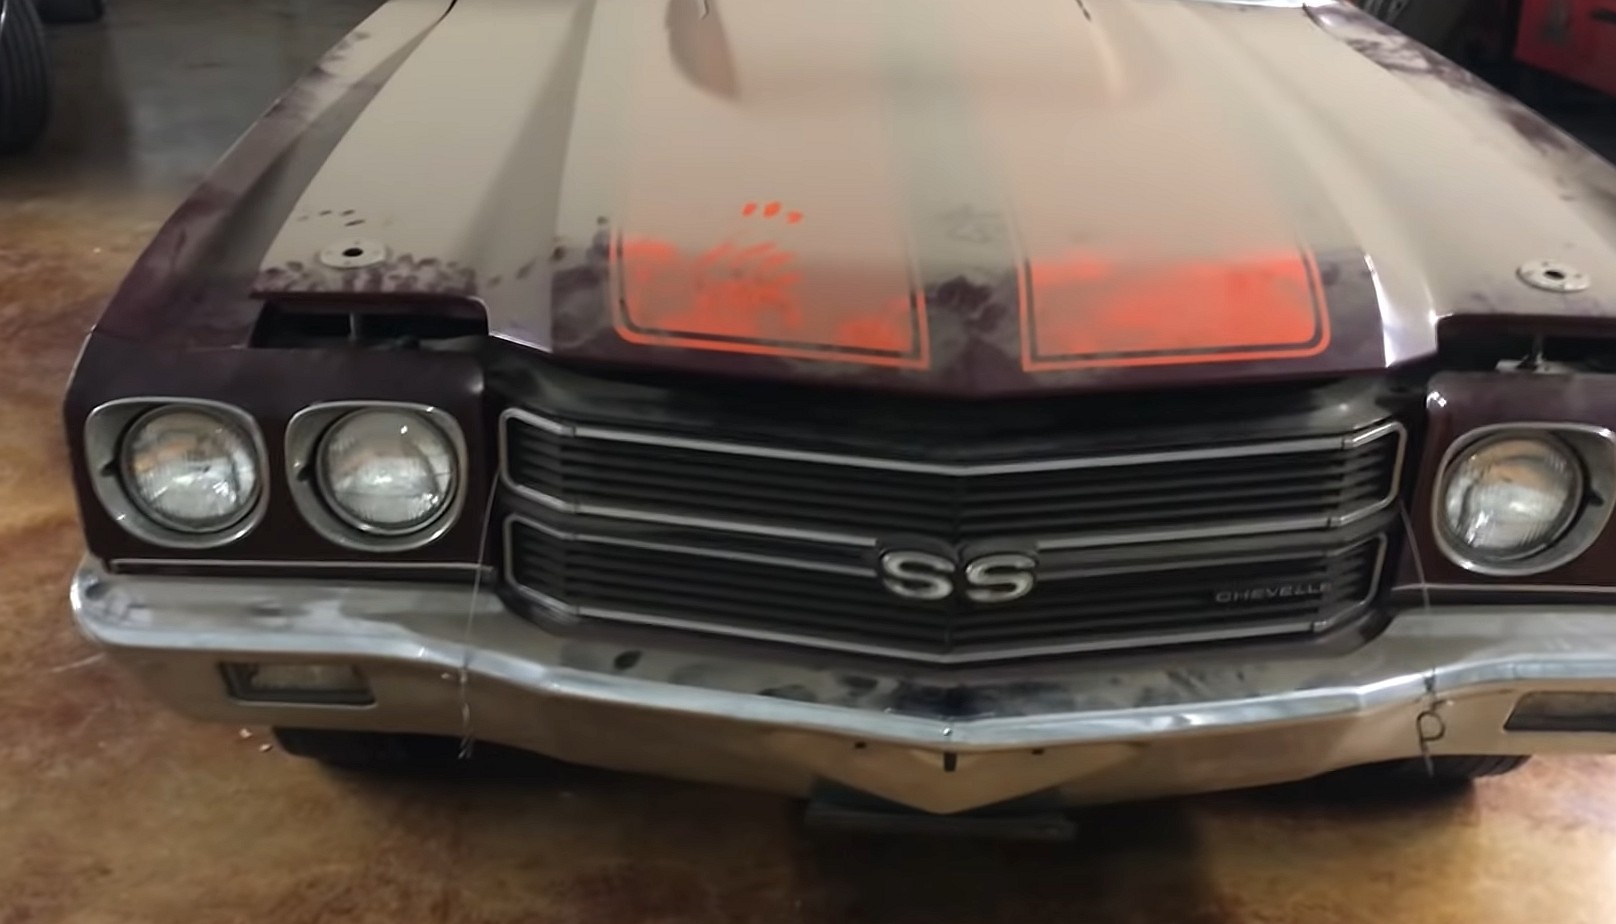 Holy Grail 1970 Chevrolet Chevelle LS6 Found Parked on a Garage Lift After 43 Years - autoevolution